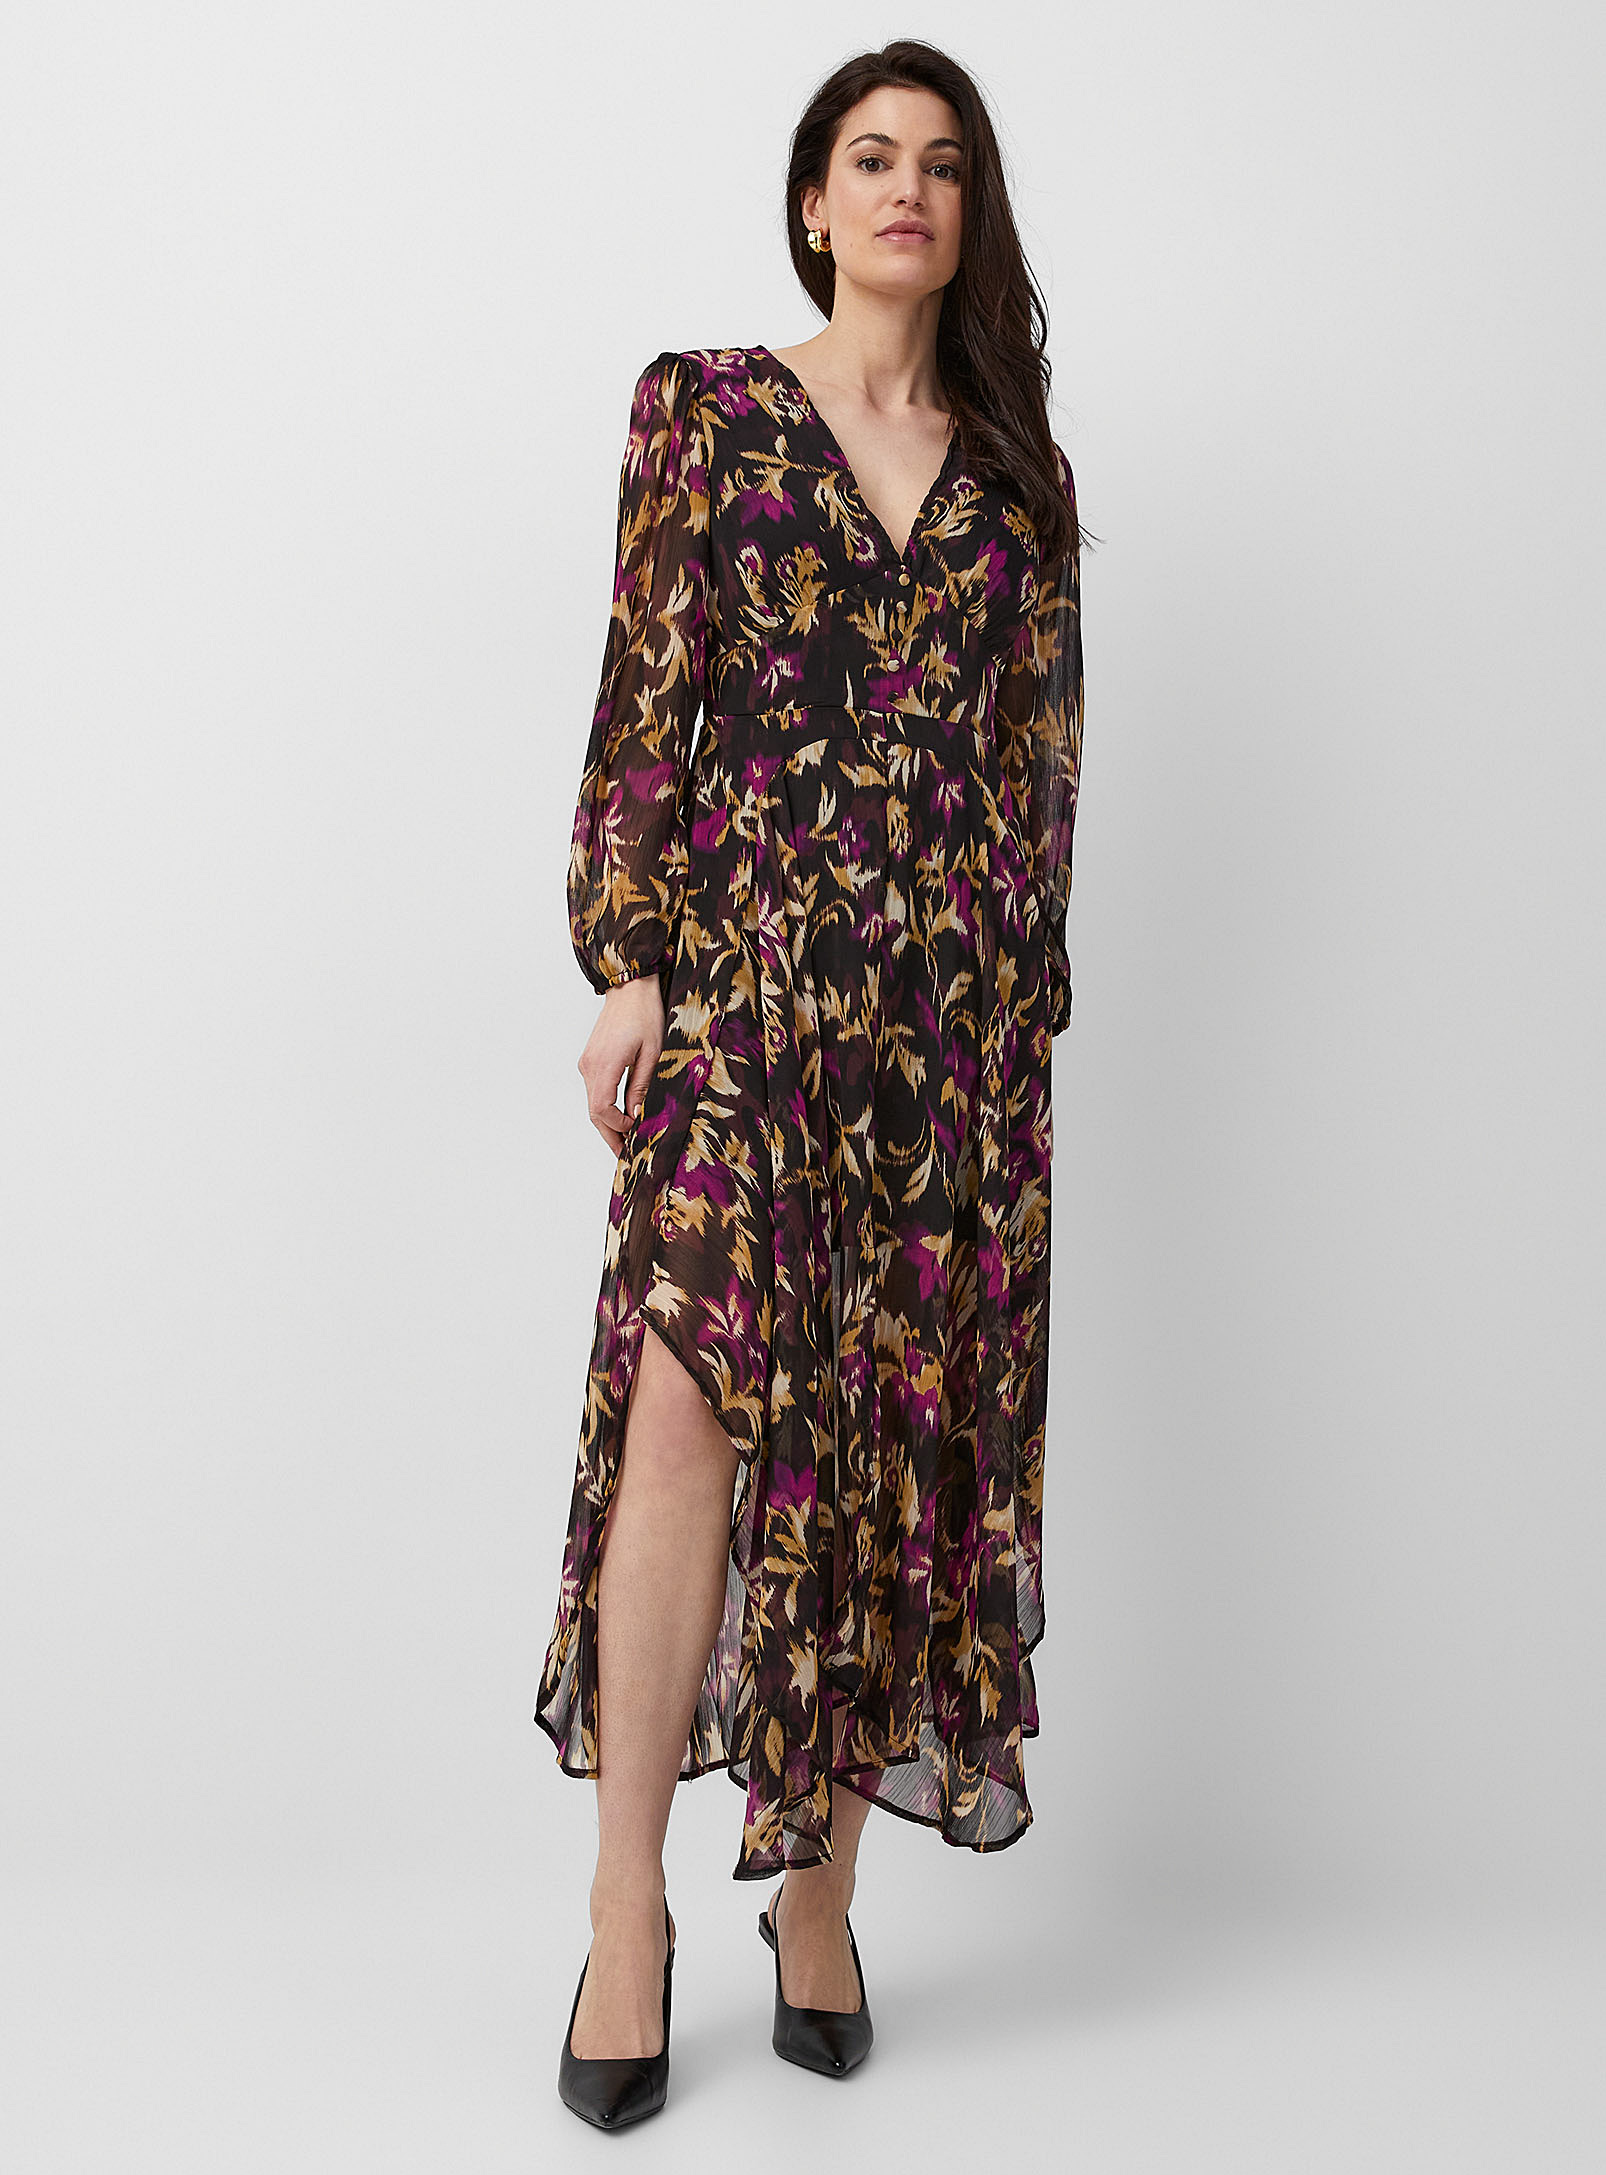 Contemporaine Floral Daydream Chiffon Dress In Patterned Black